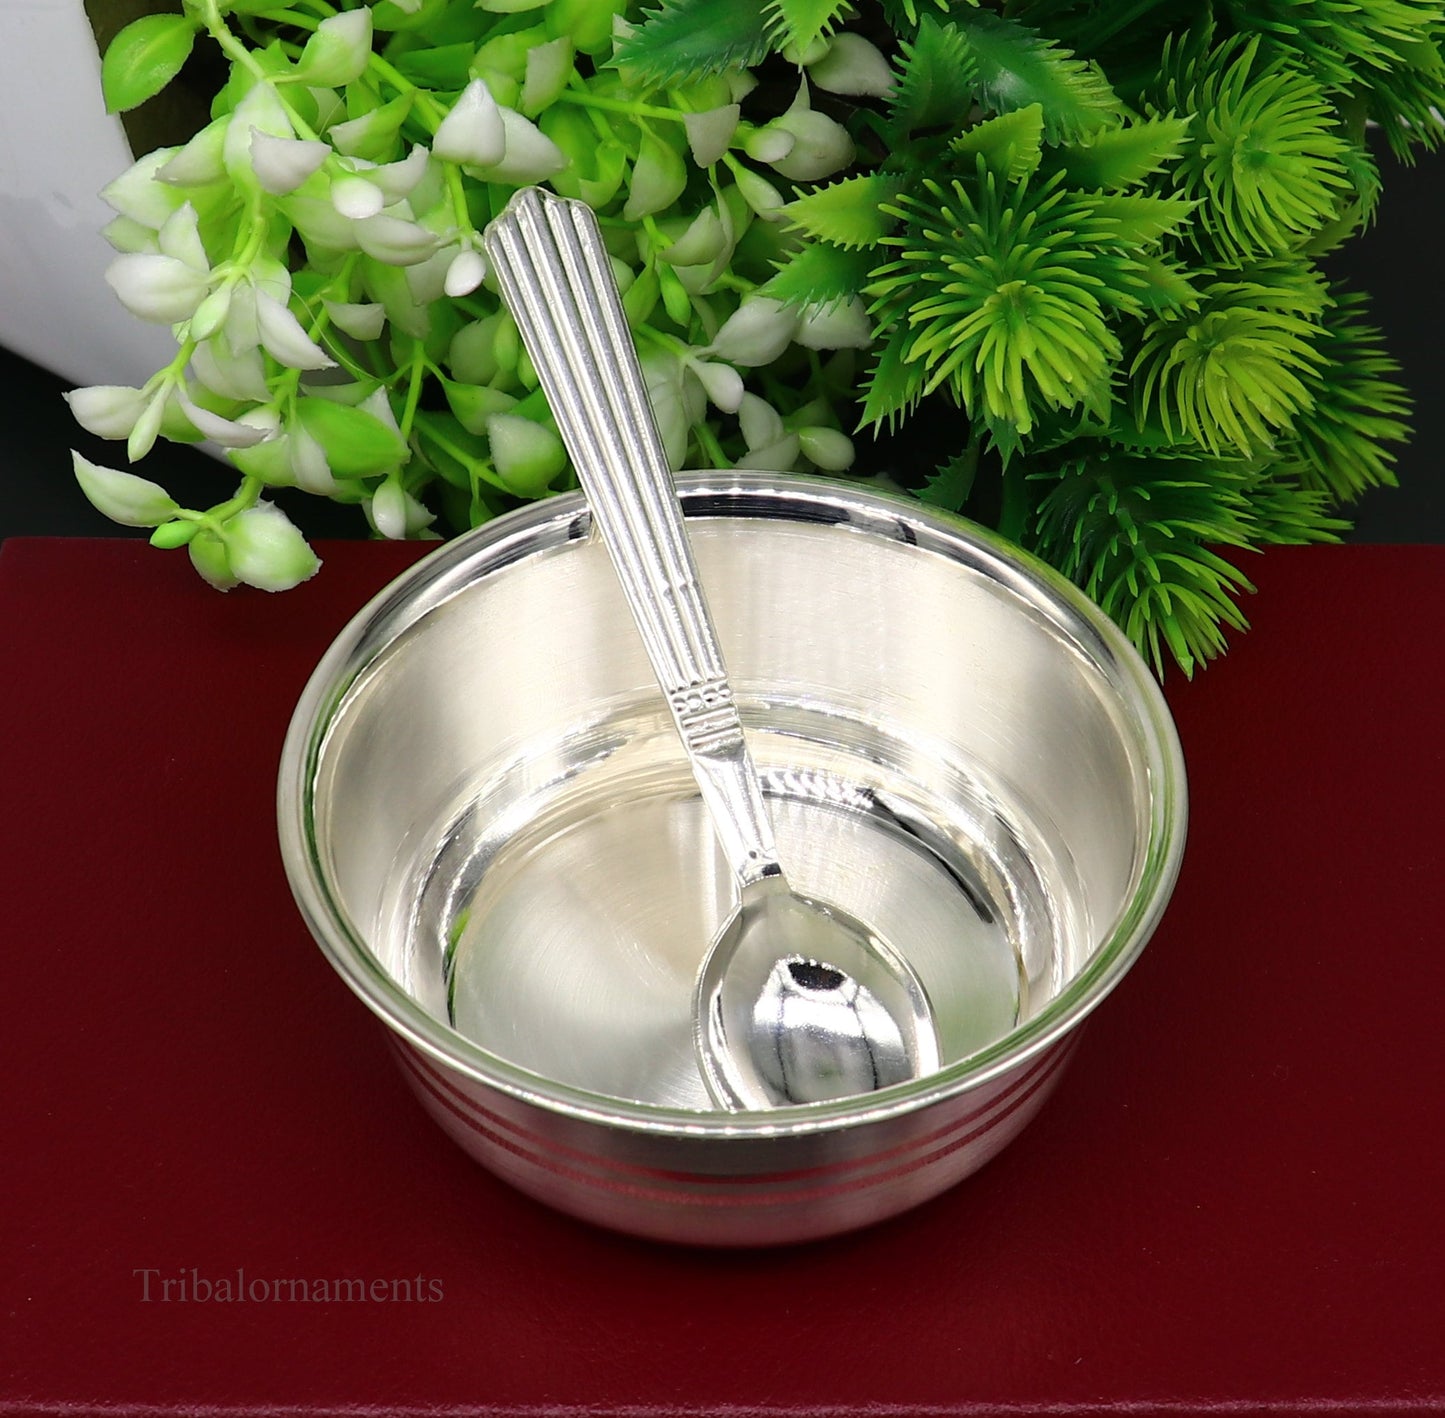 999 fine solid silver handmade small bowl for baby food, pure silver vessels, silver utensils, home and kitchen accessories India sv222 - TRIBAL ORNAMENTS